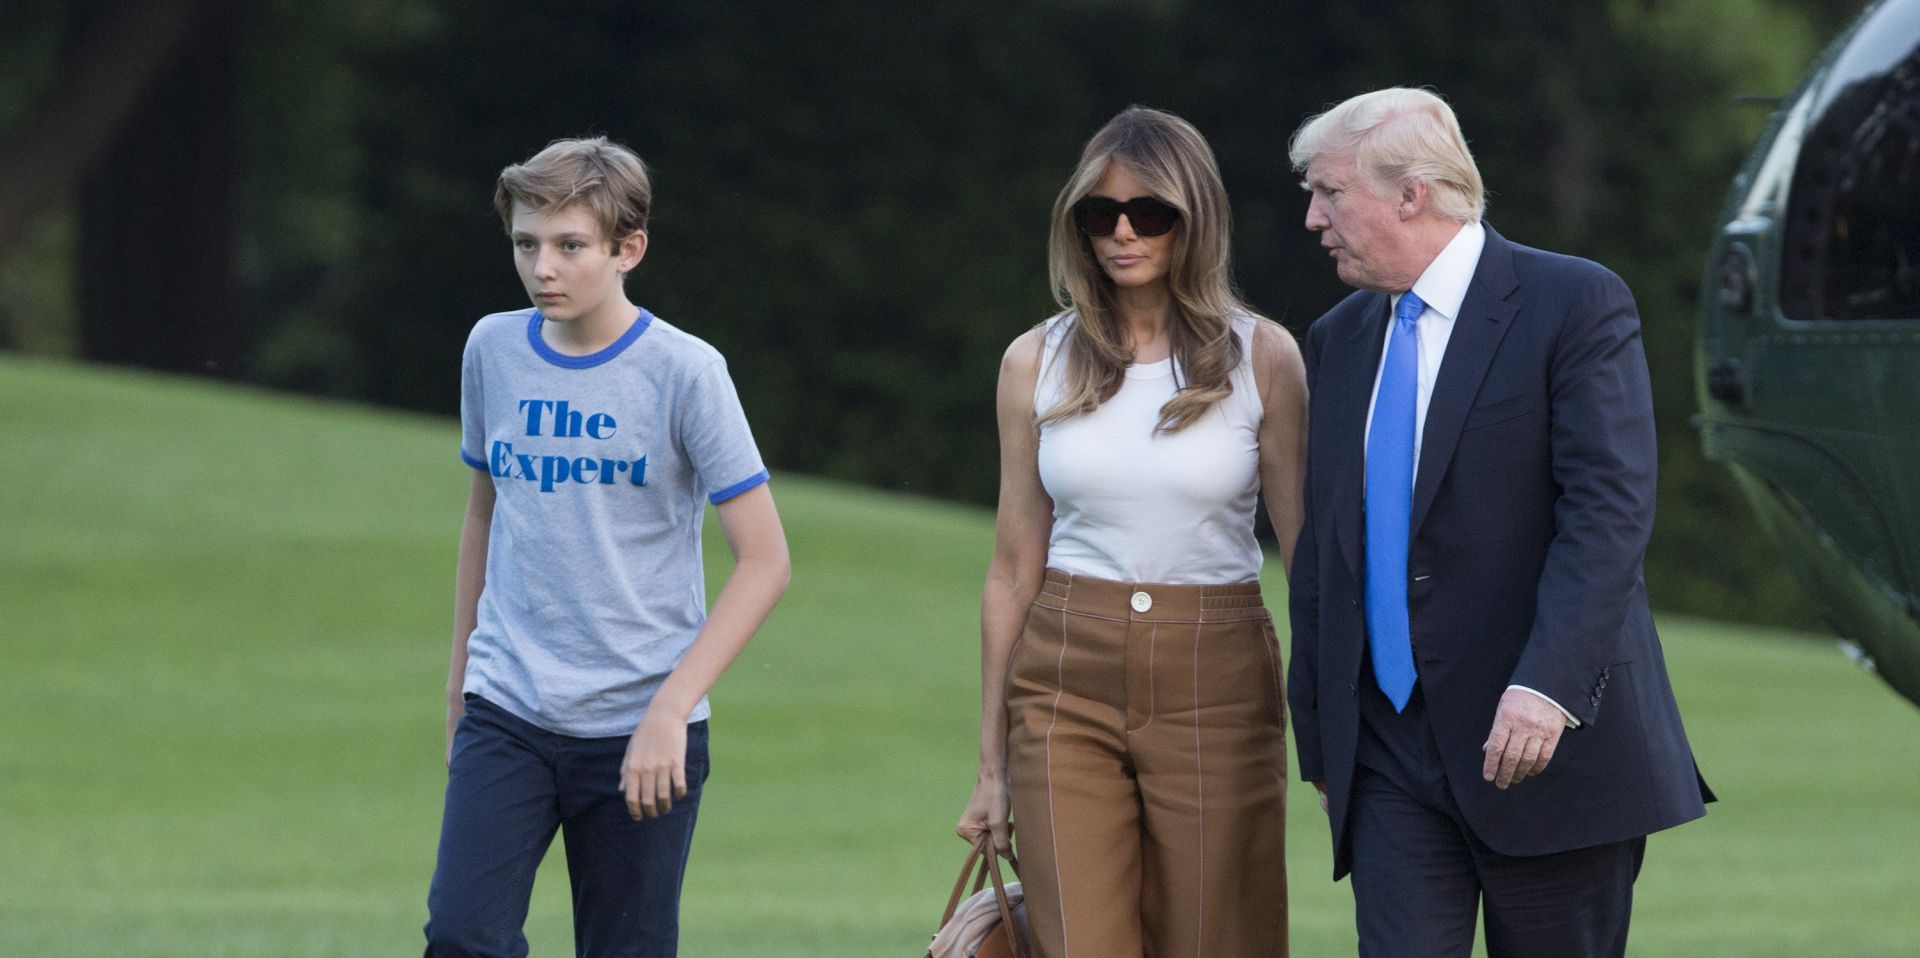 epa06023646 US President Donald J. Trump (R), First Lady Melania Trump (C) and their son Barron Trump return to the White House in Washington, DC, USA, 11 June 2017, after a trip to New Jersey.  EPA/CHRIS KLEPONIS / POOL